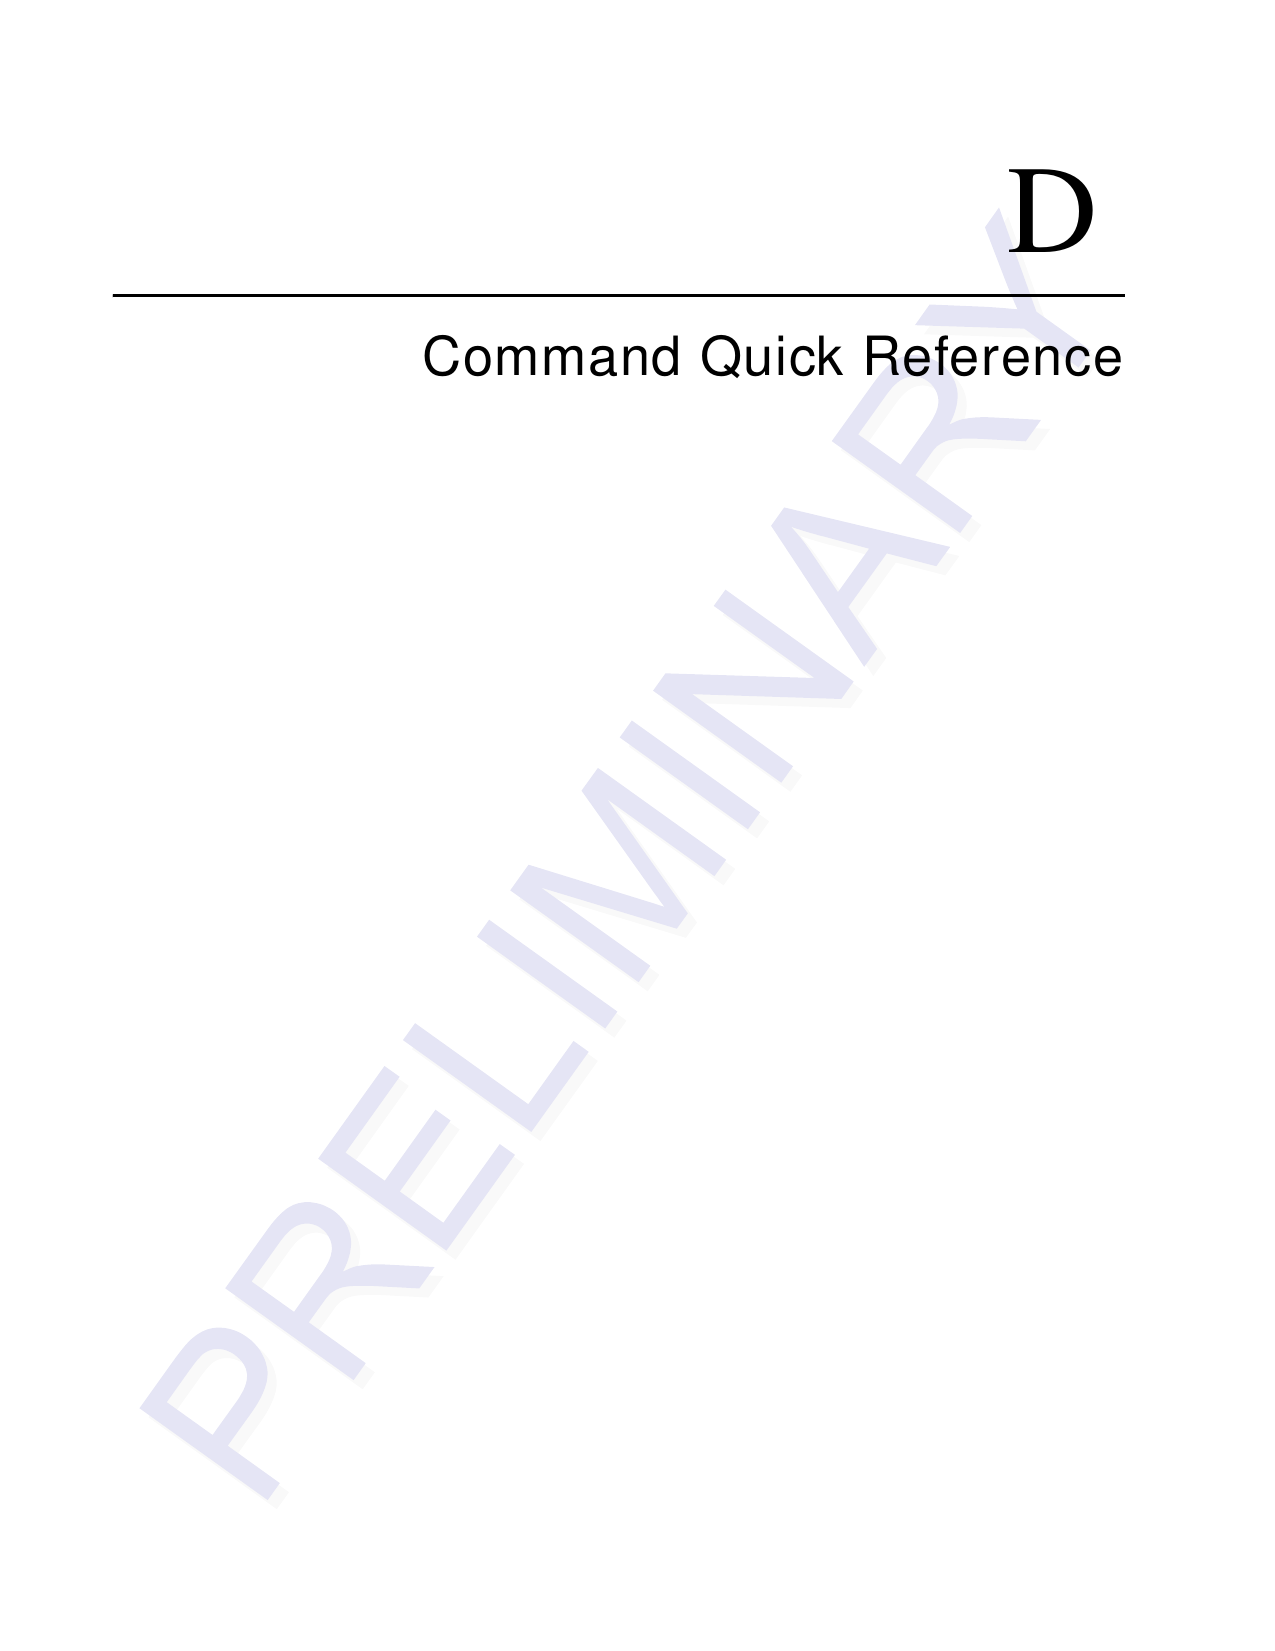 DCommand Quick Reference